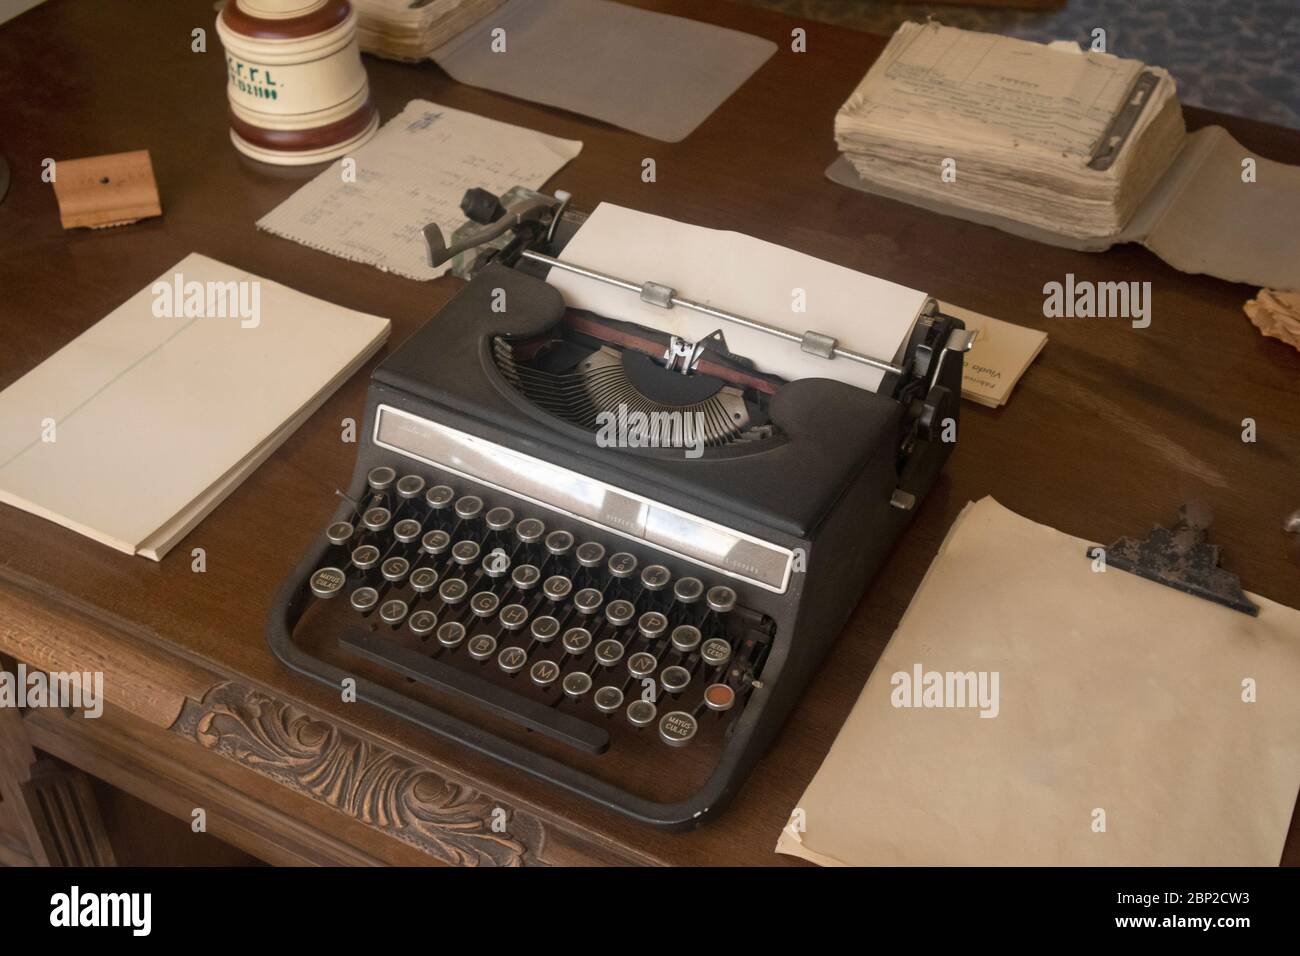 Vintage typewritter on the table Stock Photo